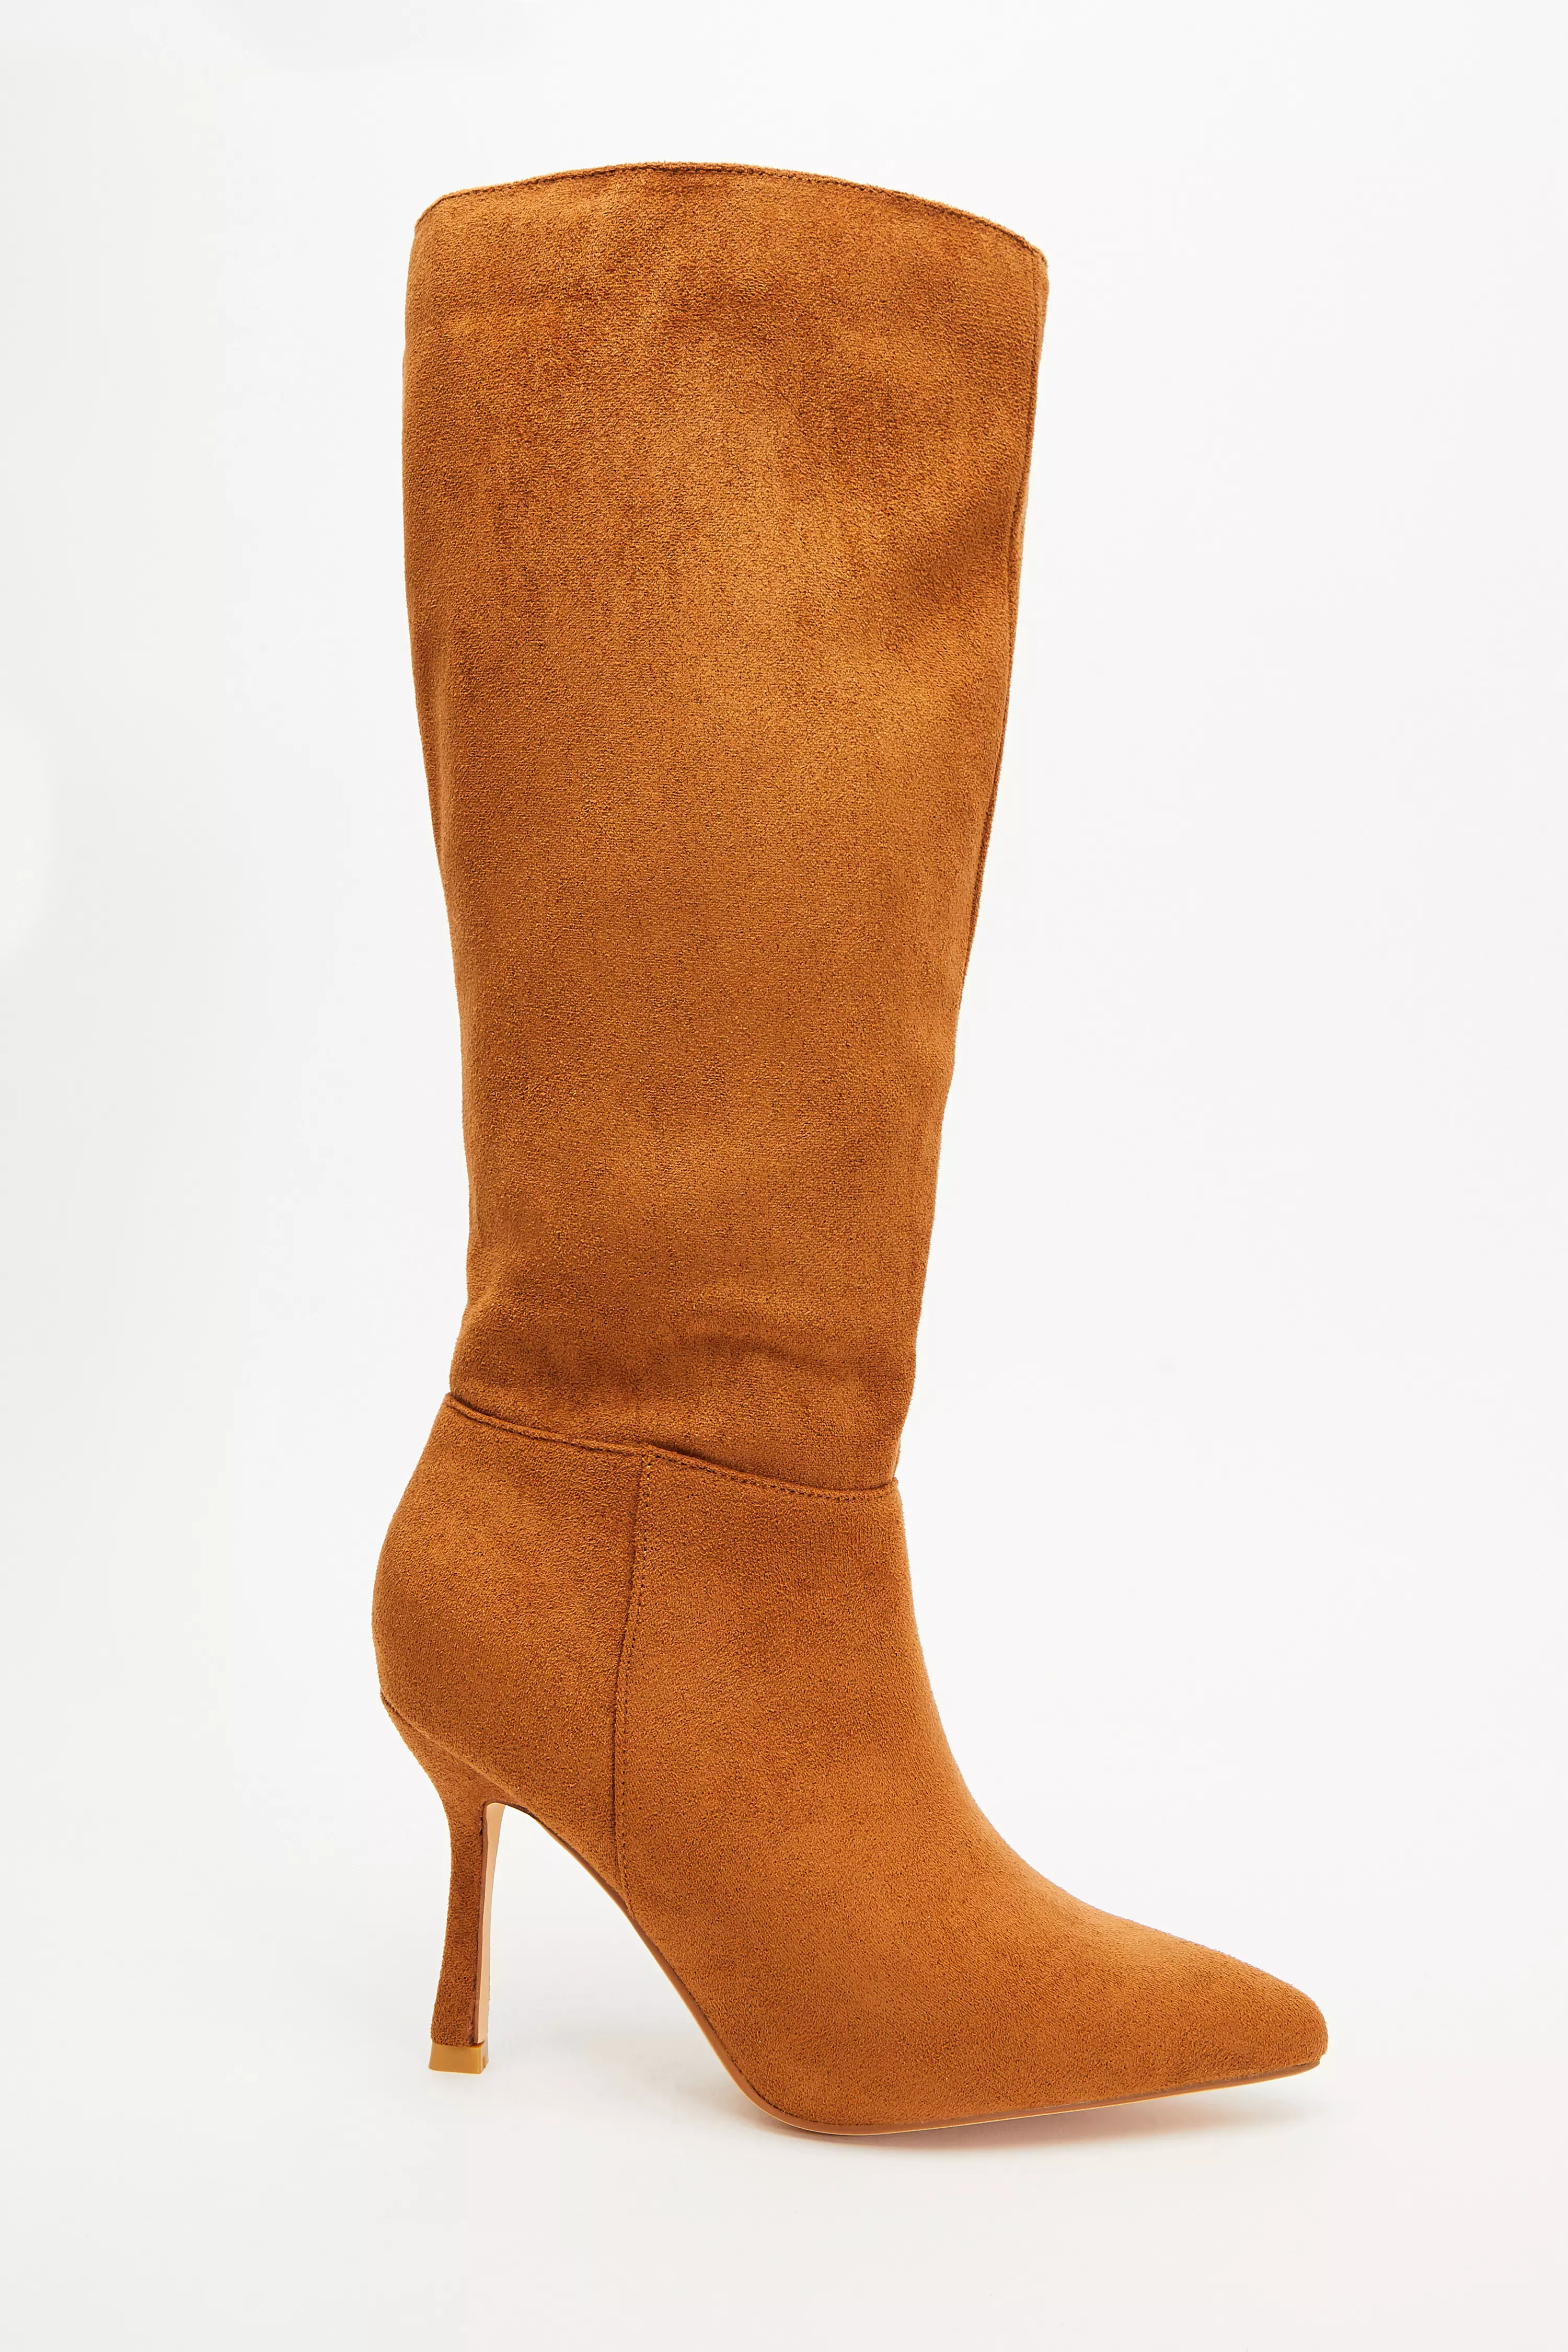 Tan Faux Suede Knee High Heeled Boots